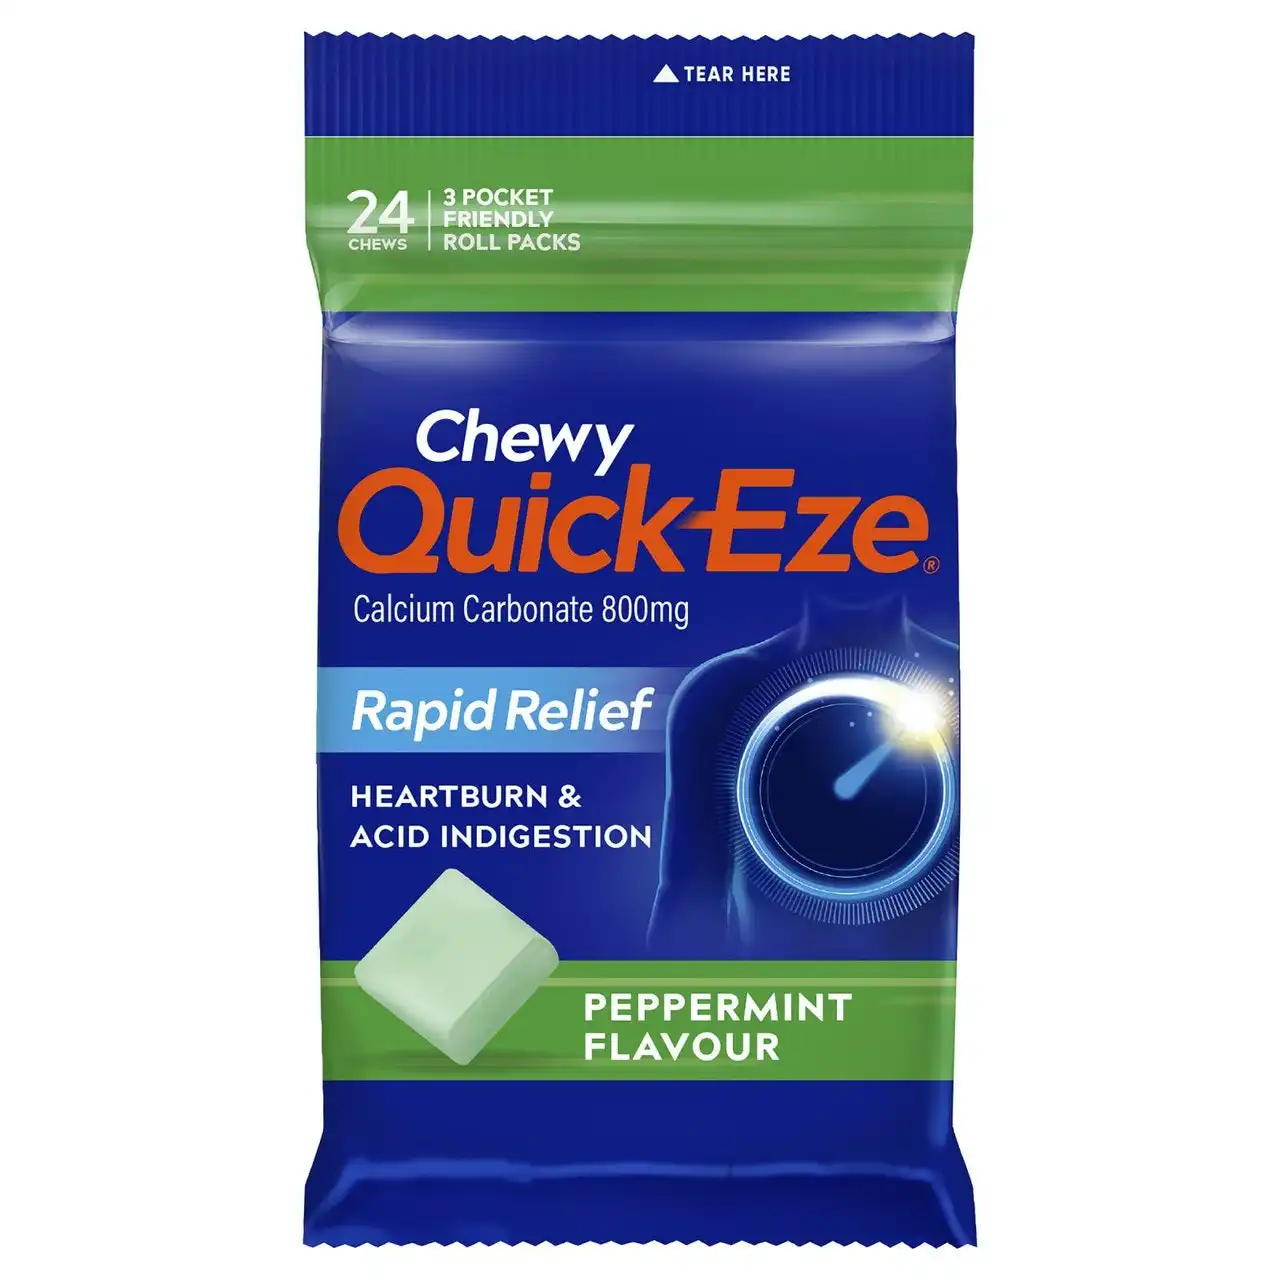 Quick Eze Peppermint Chewy Rapid Heartburn & Indigestion Relief 3x8 Pack